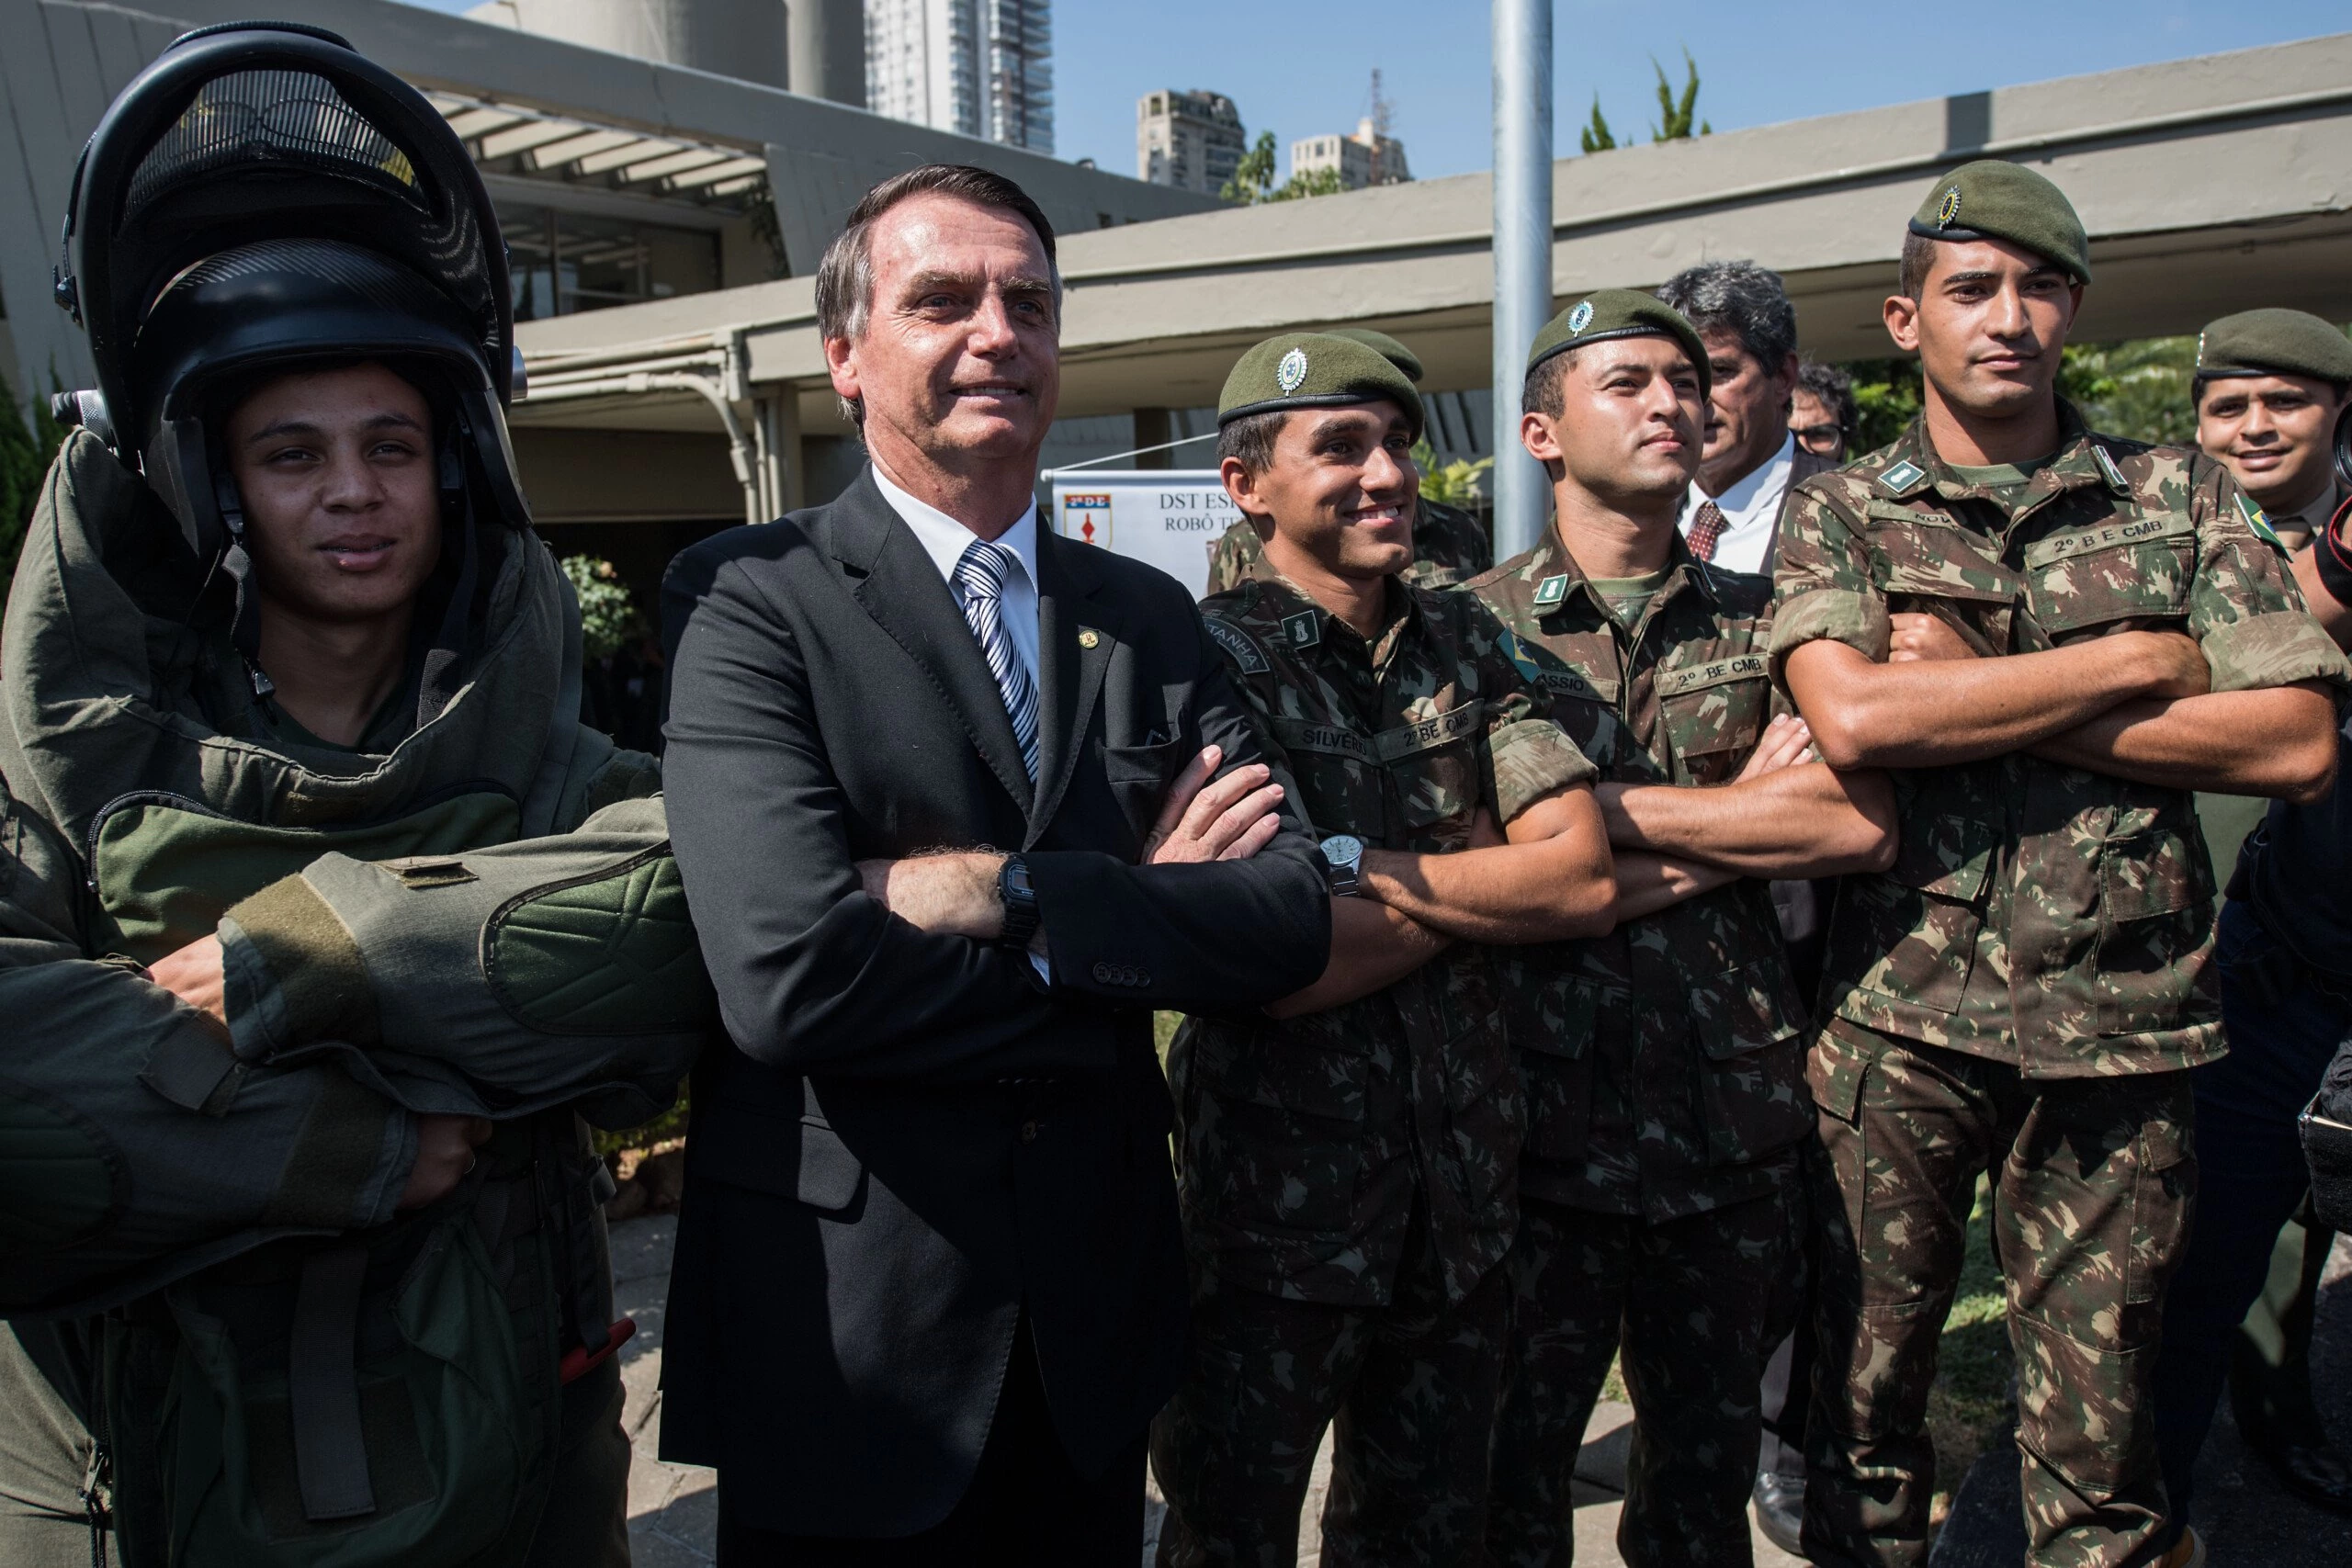 Brazilian congressman and presidential canditate for the next election, Jair Bolsonaro (R), poses for pictures with militaries during an military event in Sao Paulo, Brazil on May 3, 2018. (Photo by Nelson ALMEIDA / AFP)        (Photo credit should read NELSON ALMEIDA/AFP/Getty Images)